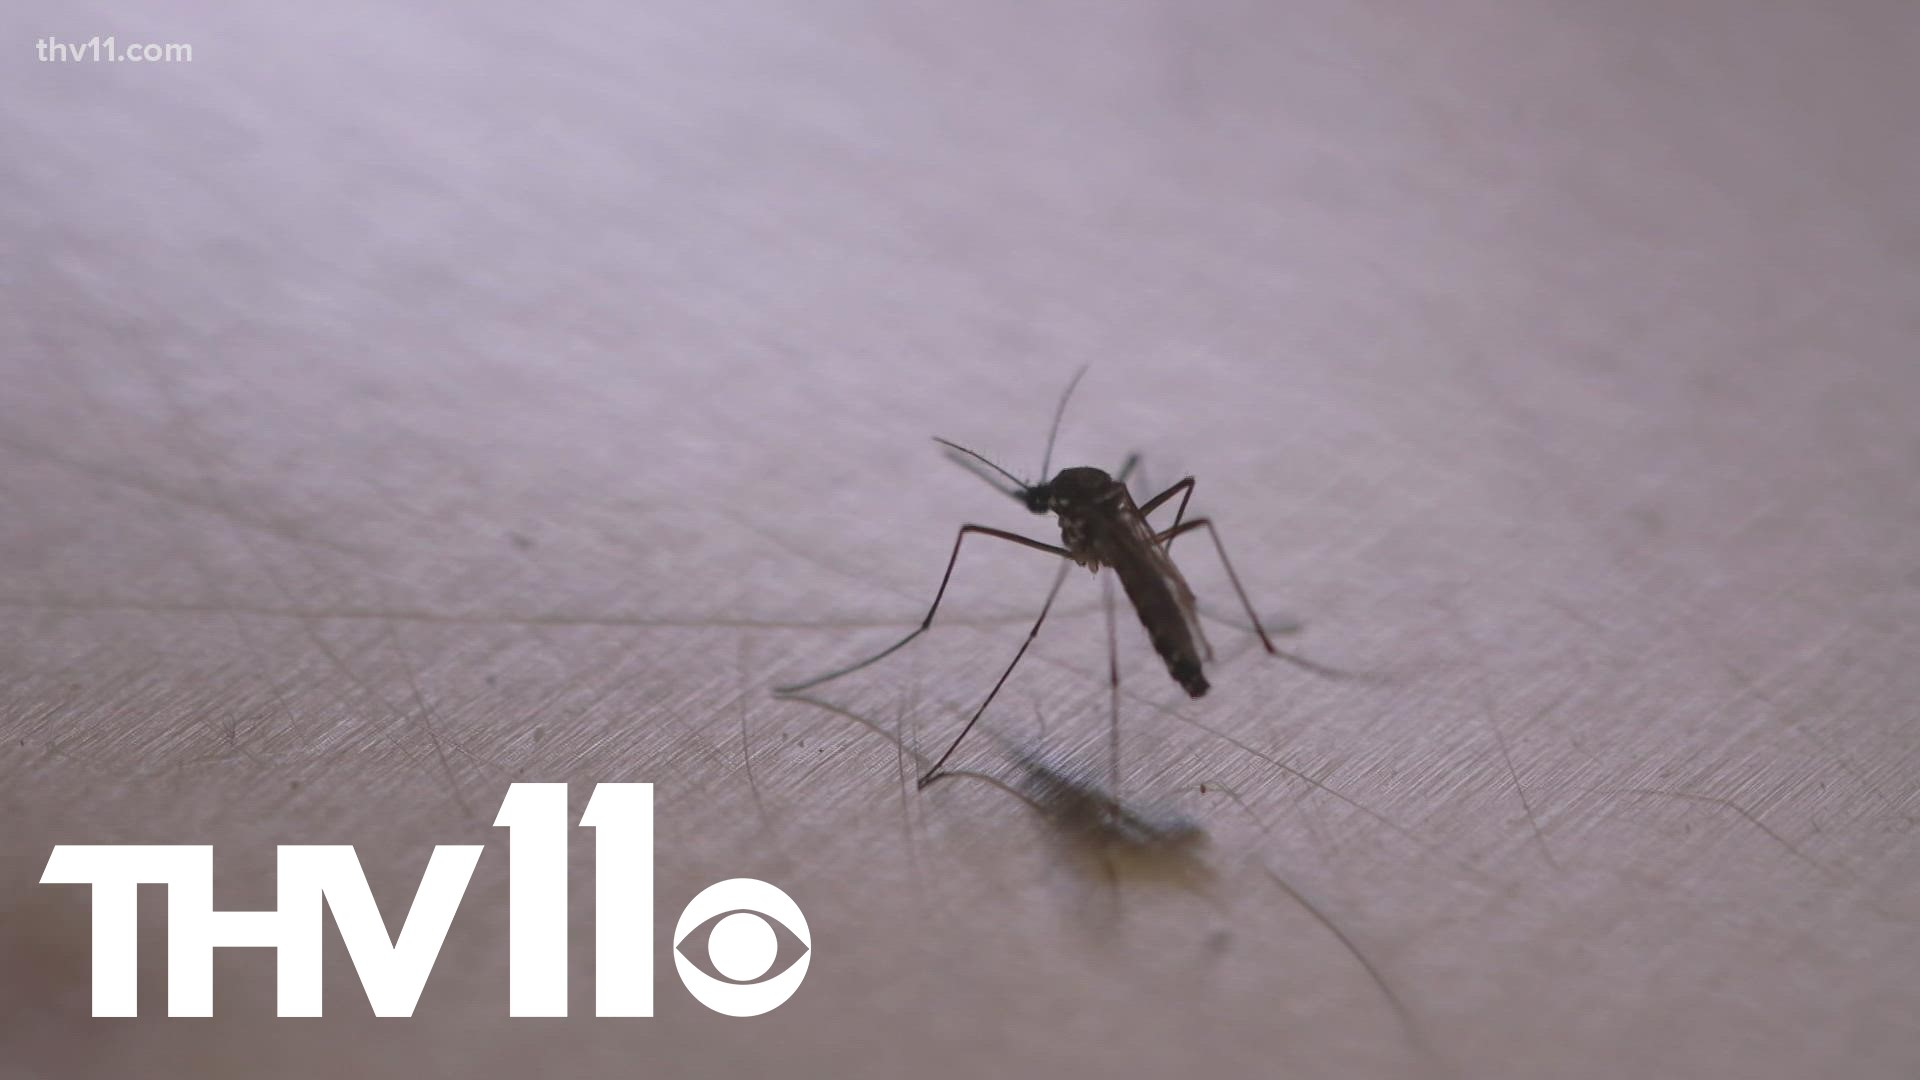 Mosquitos have been swarming around more this year than in years past, and they are now a growing public health concern.